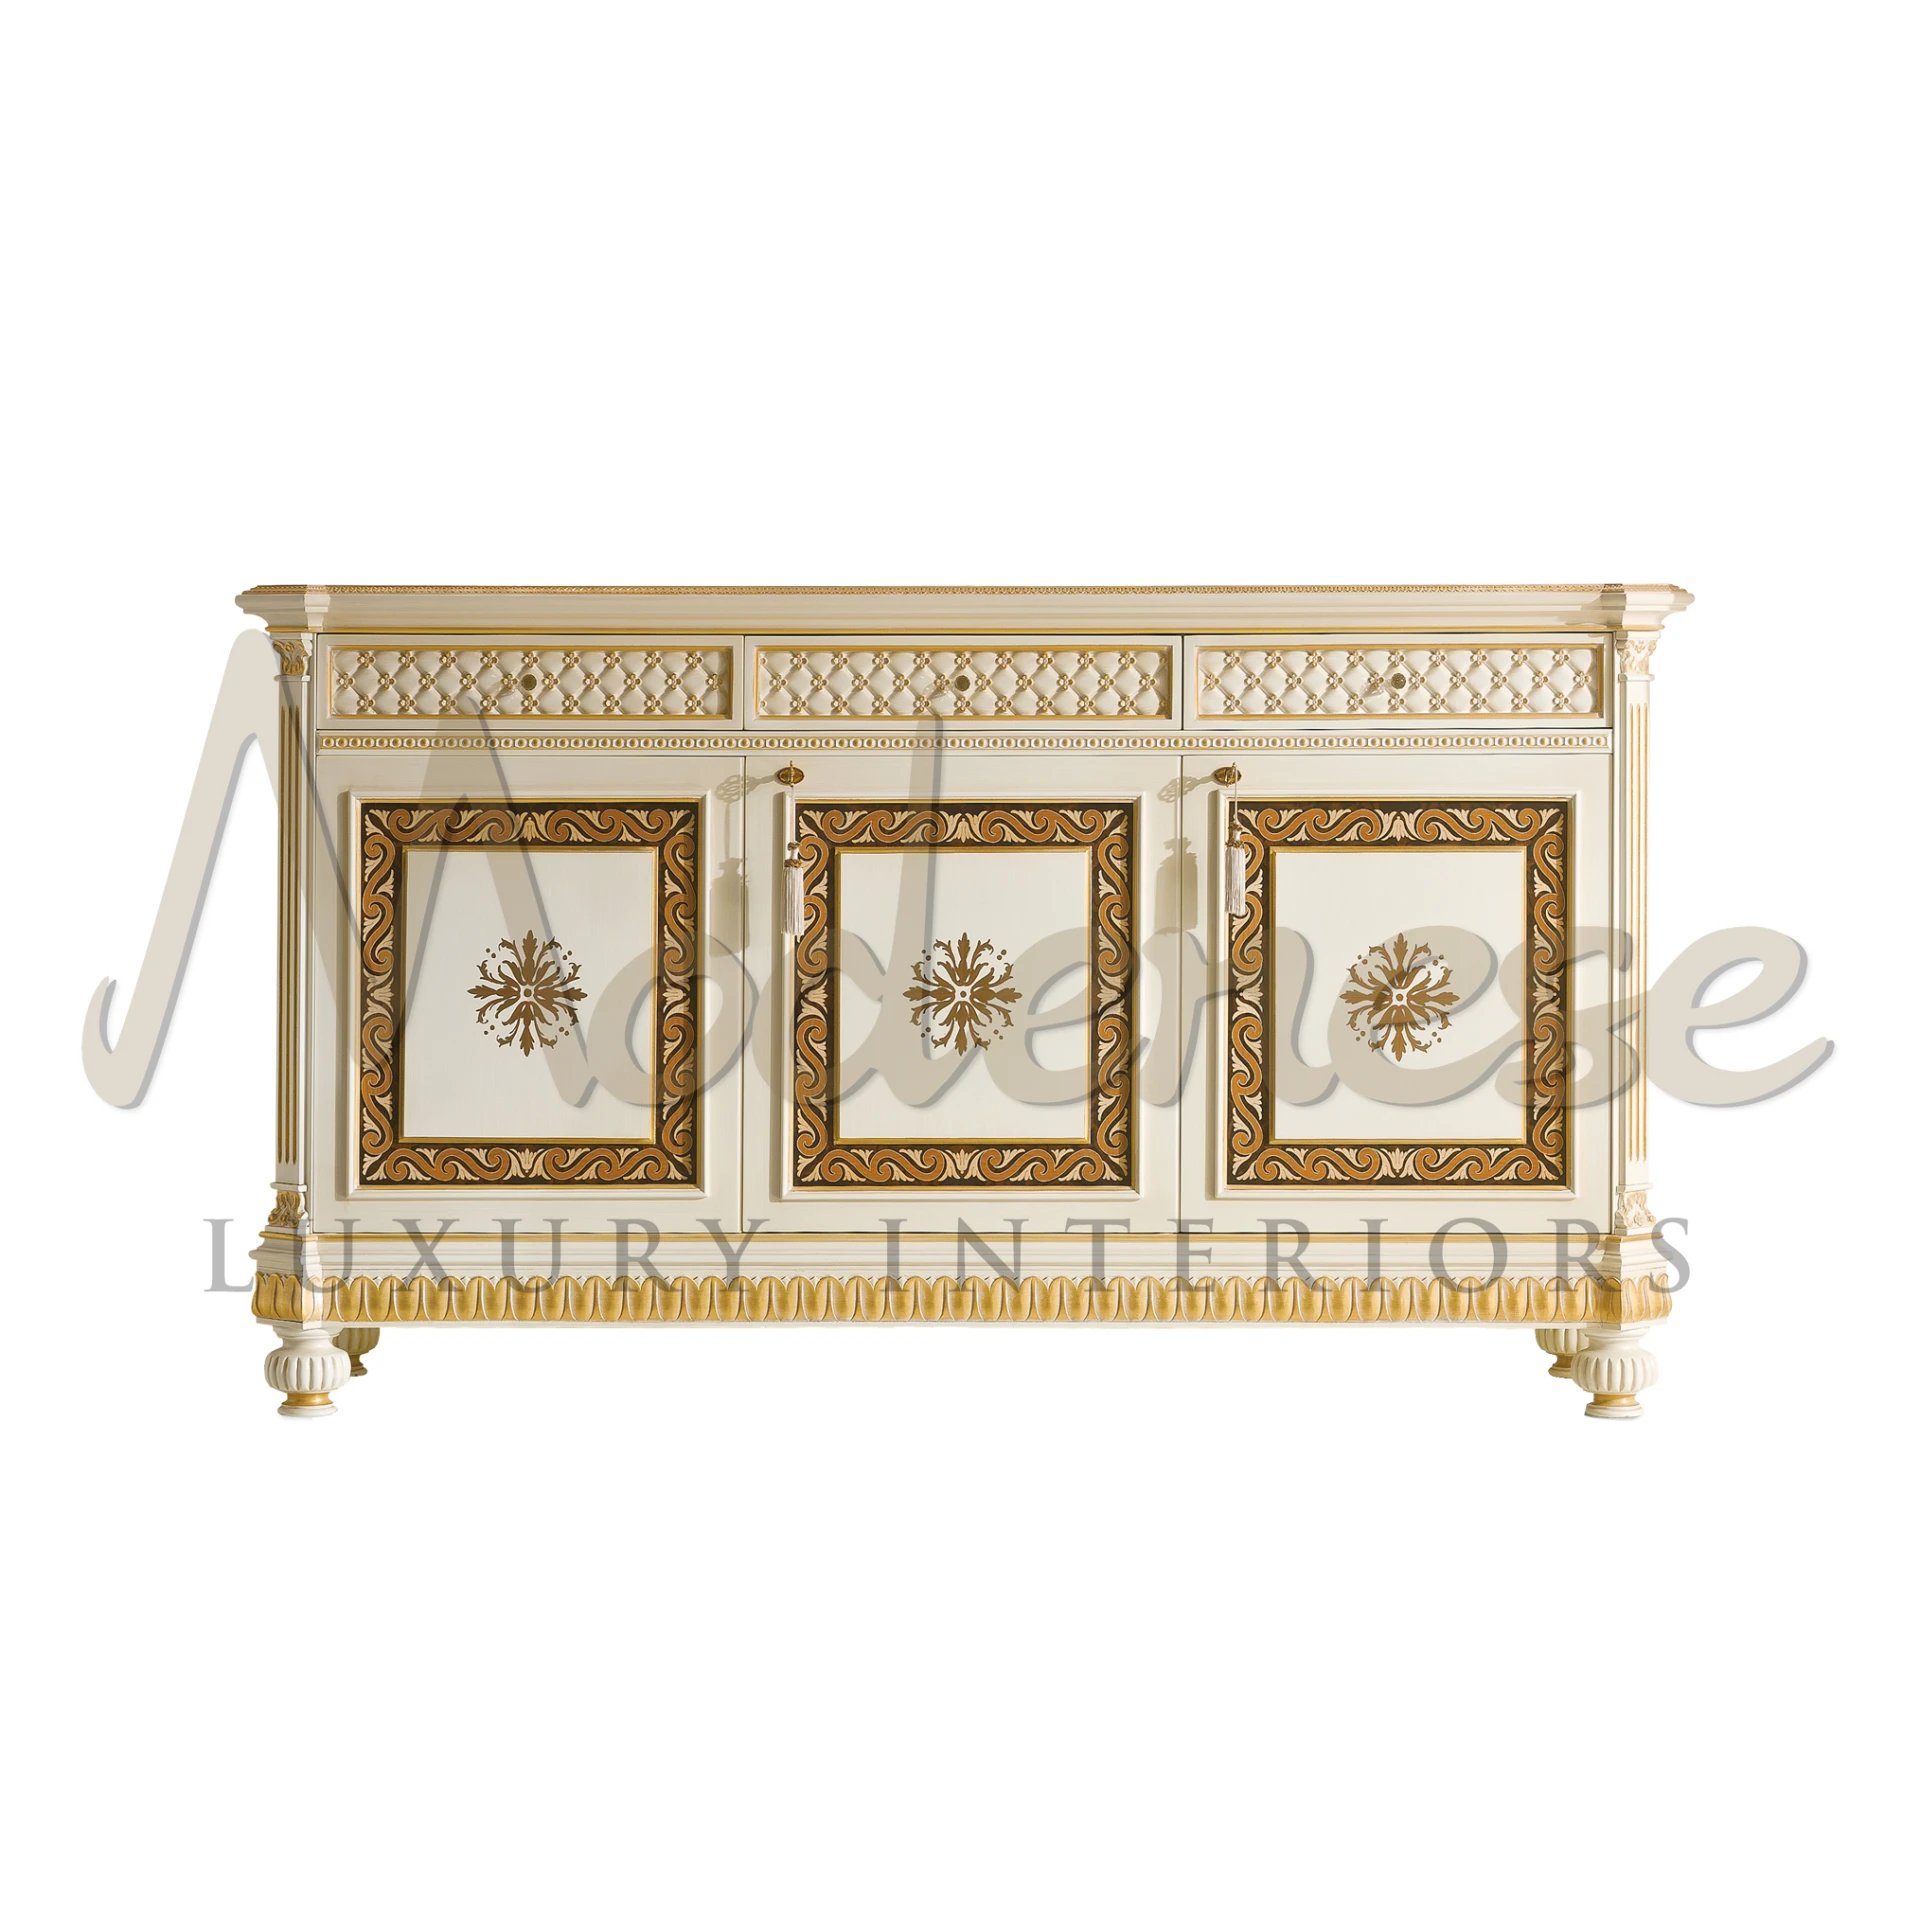 Nobel Style 3-Doors Sideboard with complicated gold detailing.